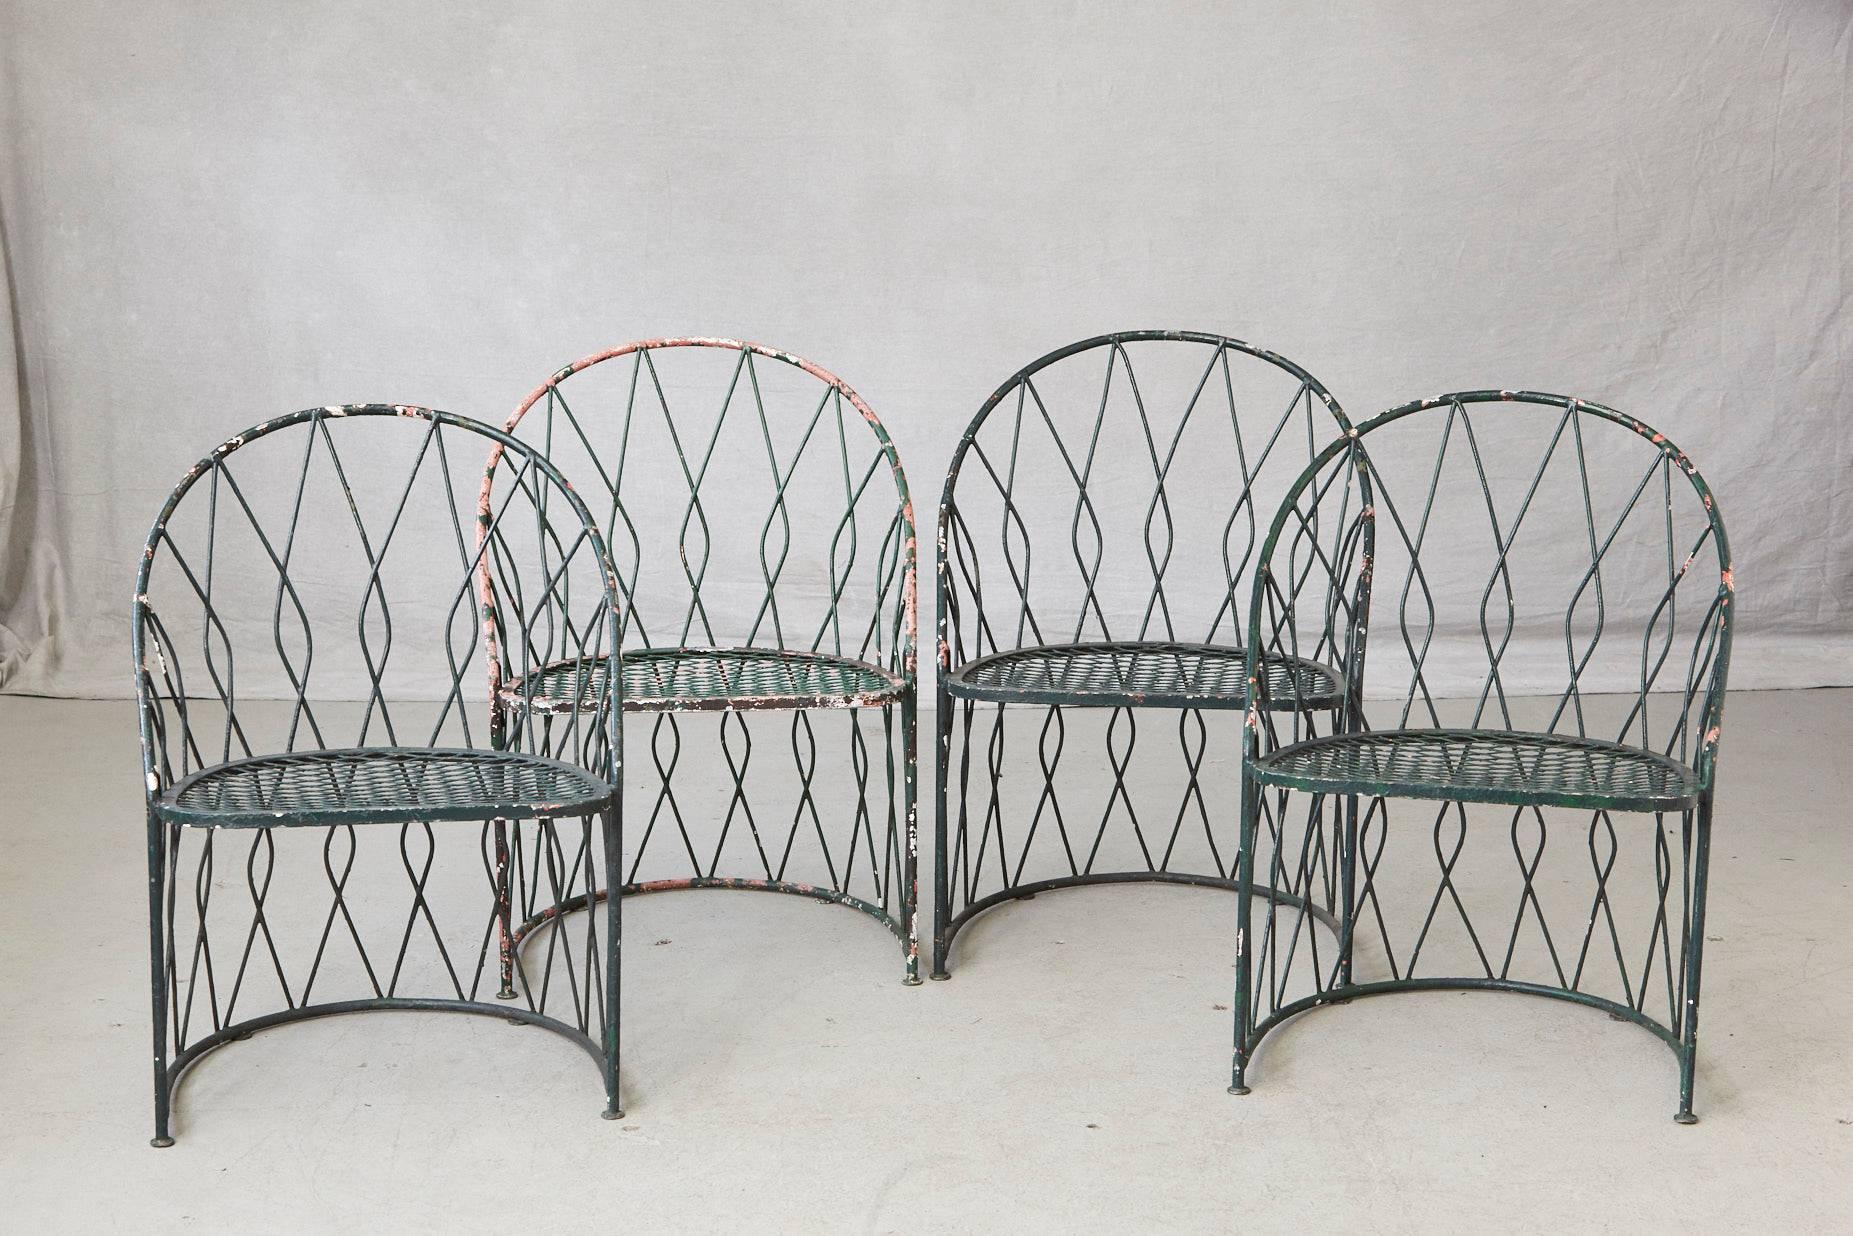 Rare set of four dark green round wrought iron garden or patio chairs by Salterini.
The chairs are decorated with a graphical, scrolled round iron backrest, very sturdy.
The green 'turtle' cushion seats are in good condition, both foam and fabric.